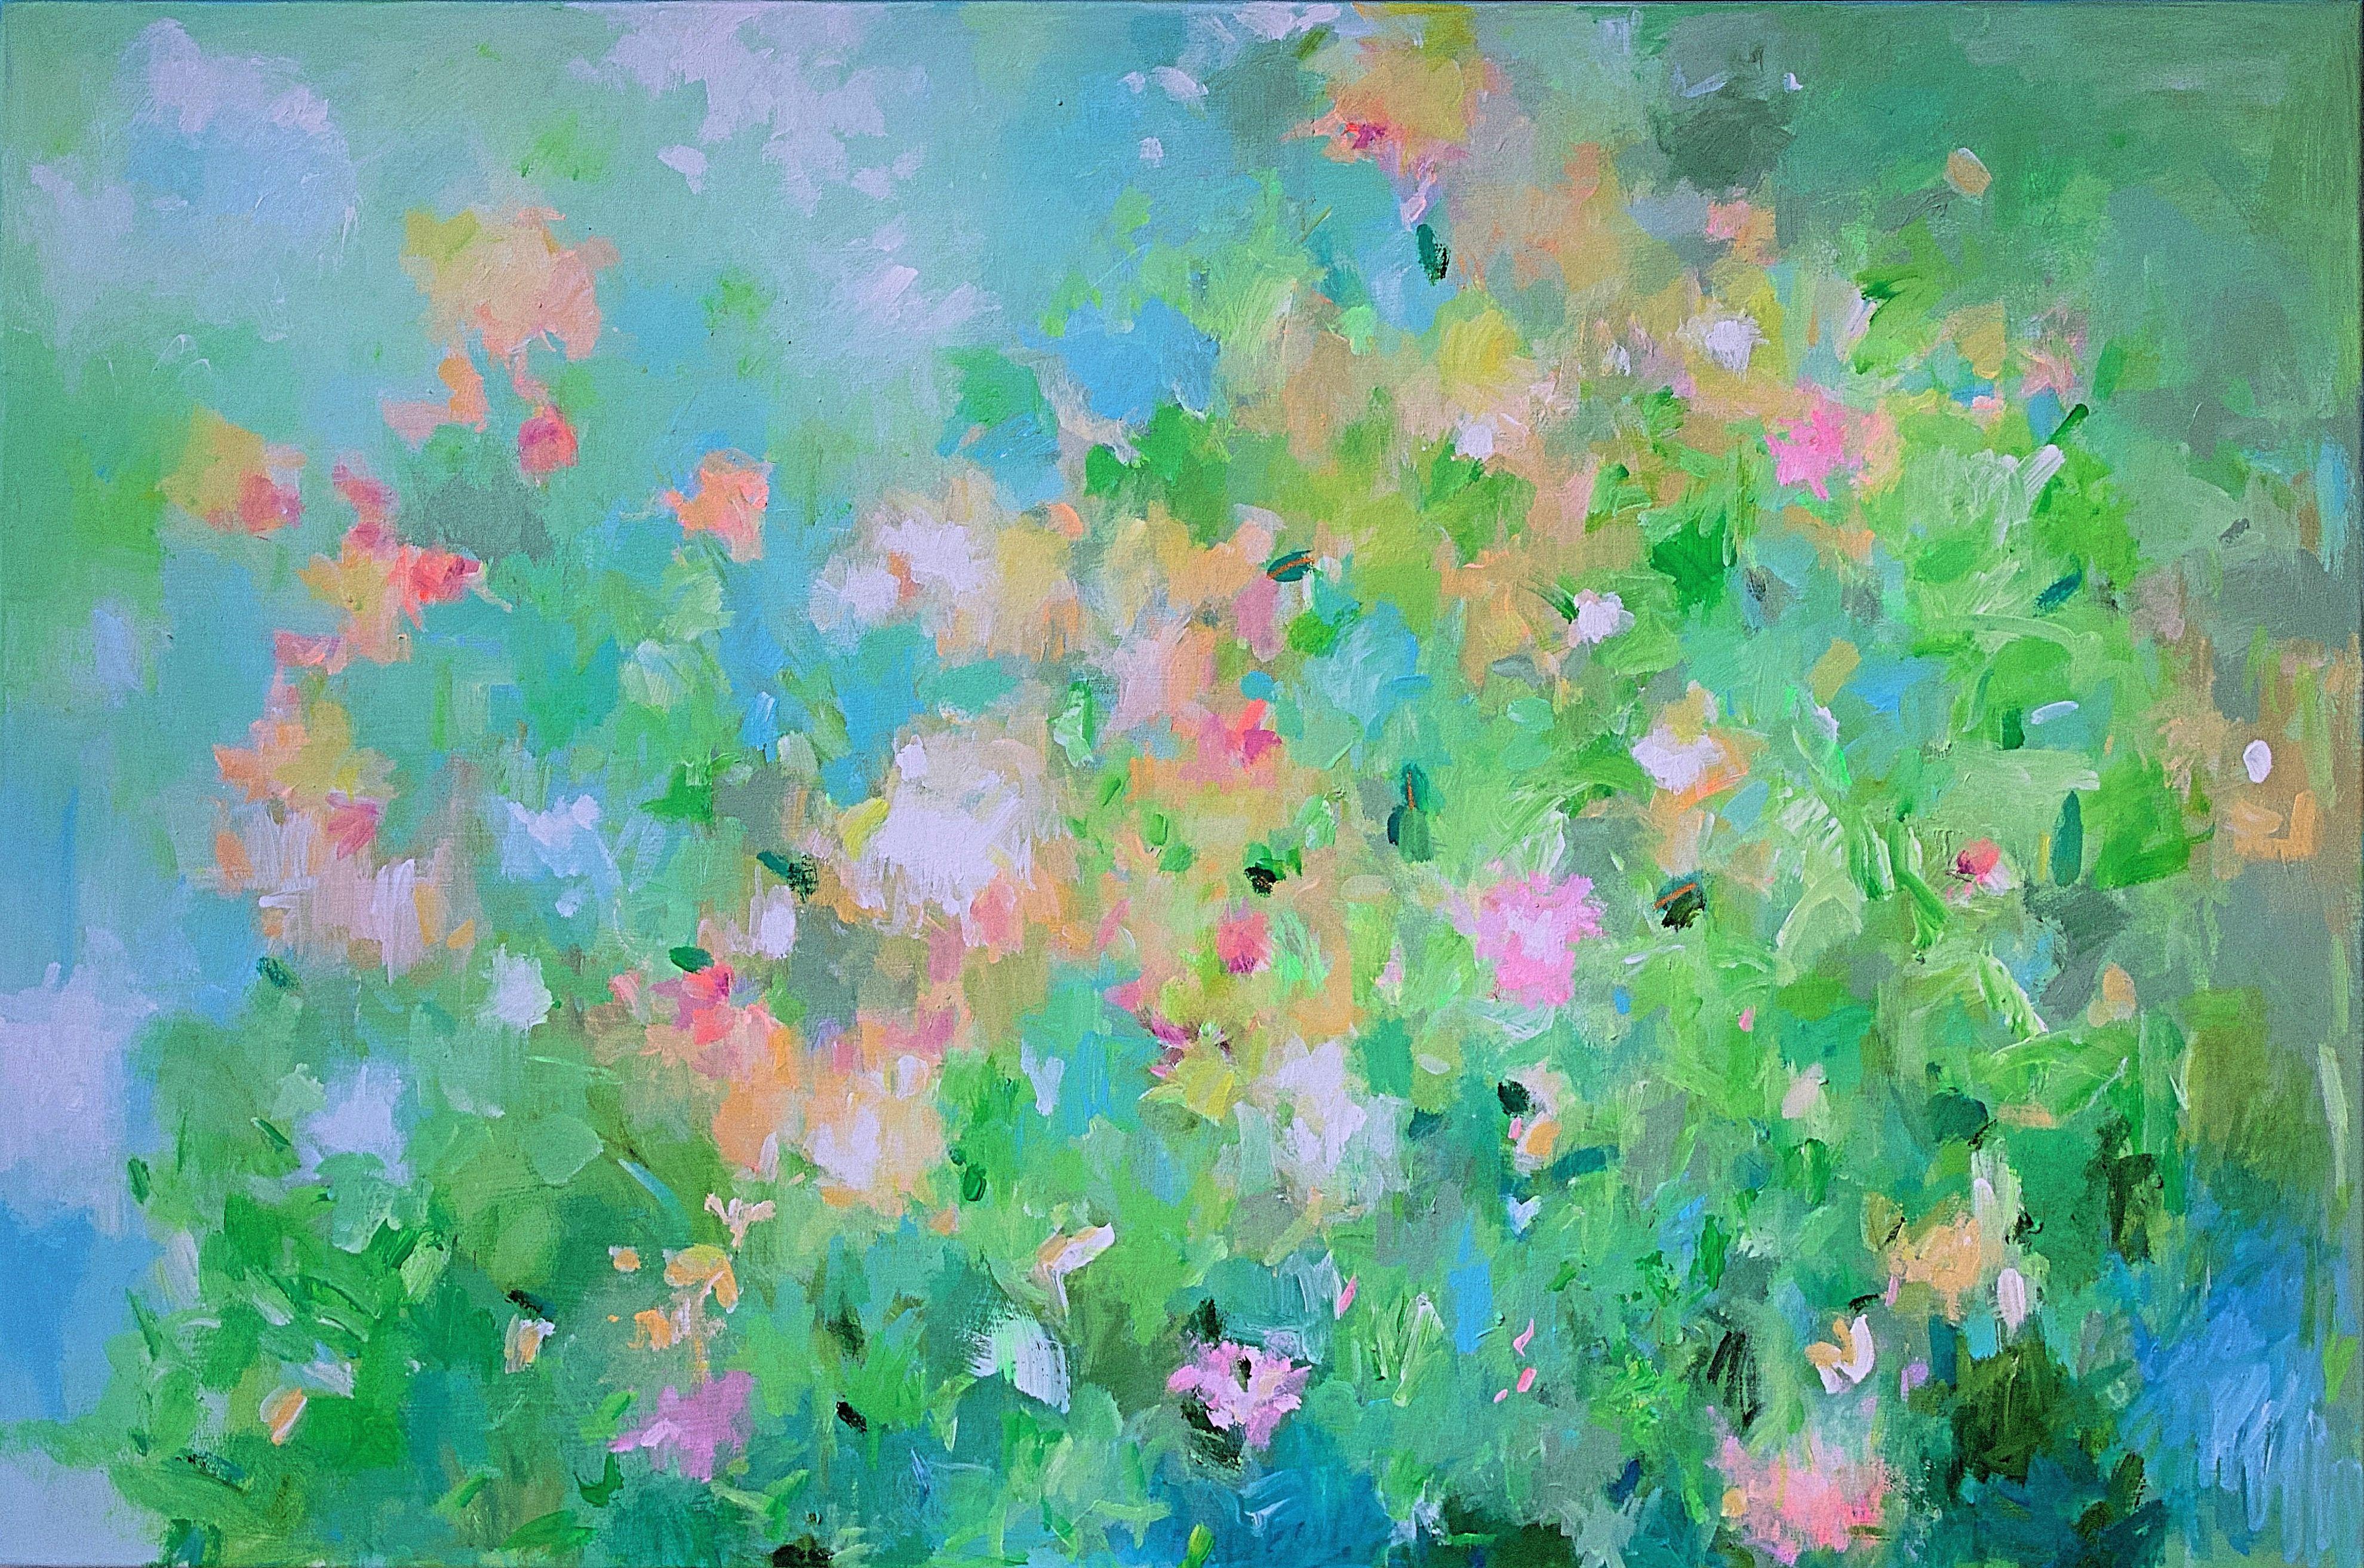 All soft colors in this painting. It has a calming and dreamy vibe with the sweet pastels in grey, green, blue, pink and a touch of (neon) orange. It is a contemporary and modern painting of abstract florals floating away in the wind, mesmerising,